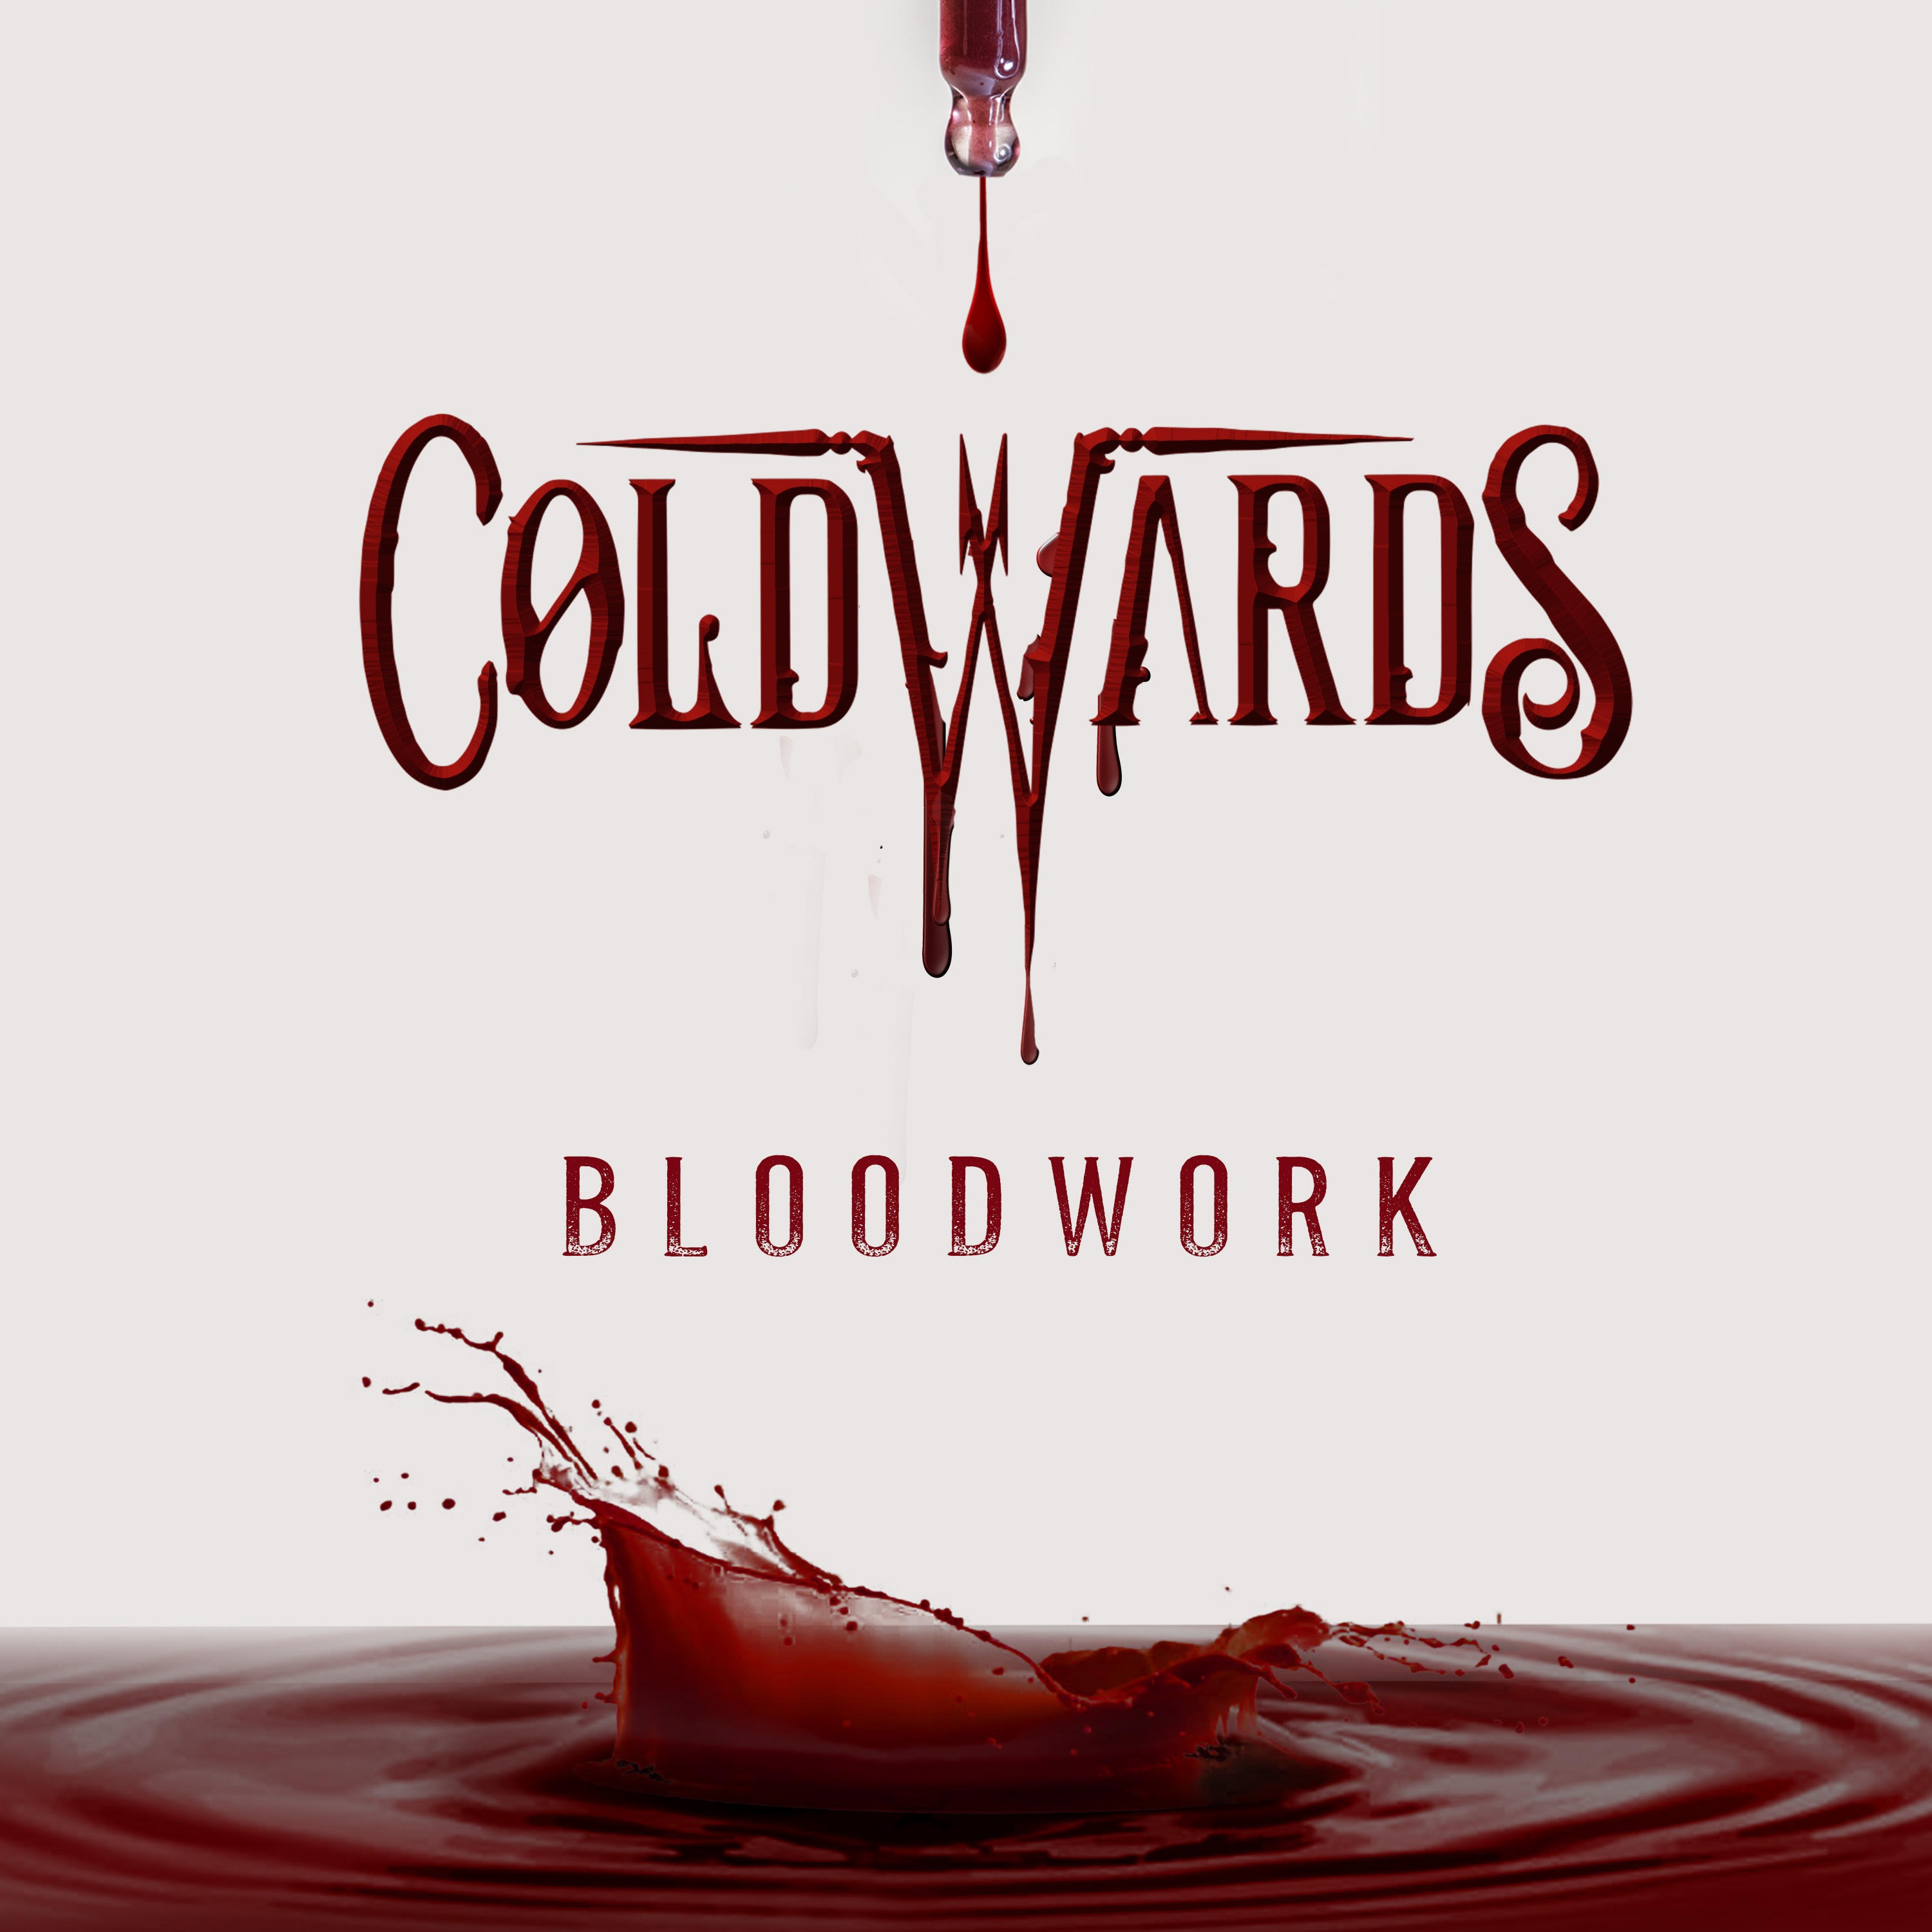 Displaying a Formidable Lyrical Depth with Alternative Metal Soundscapes - Coldwards Mark Debut with New Album "Bloodwork"